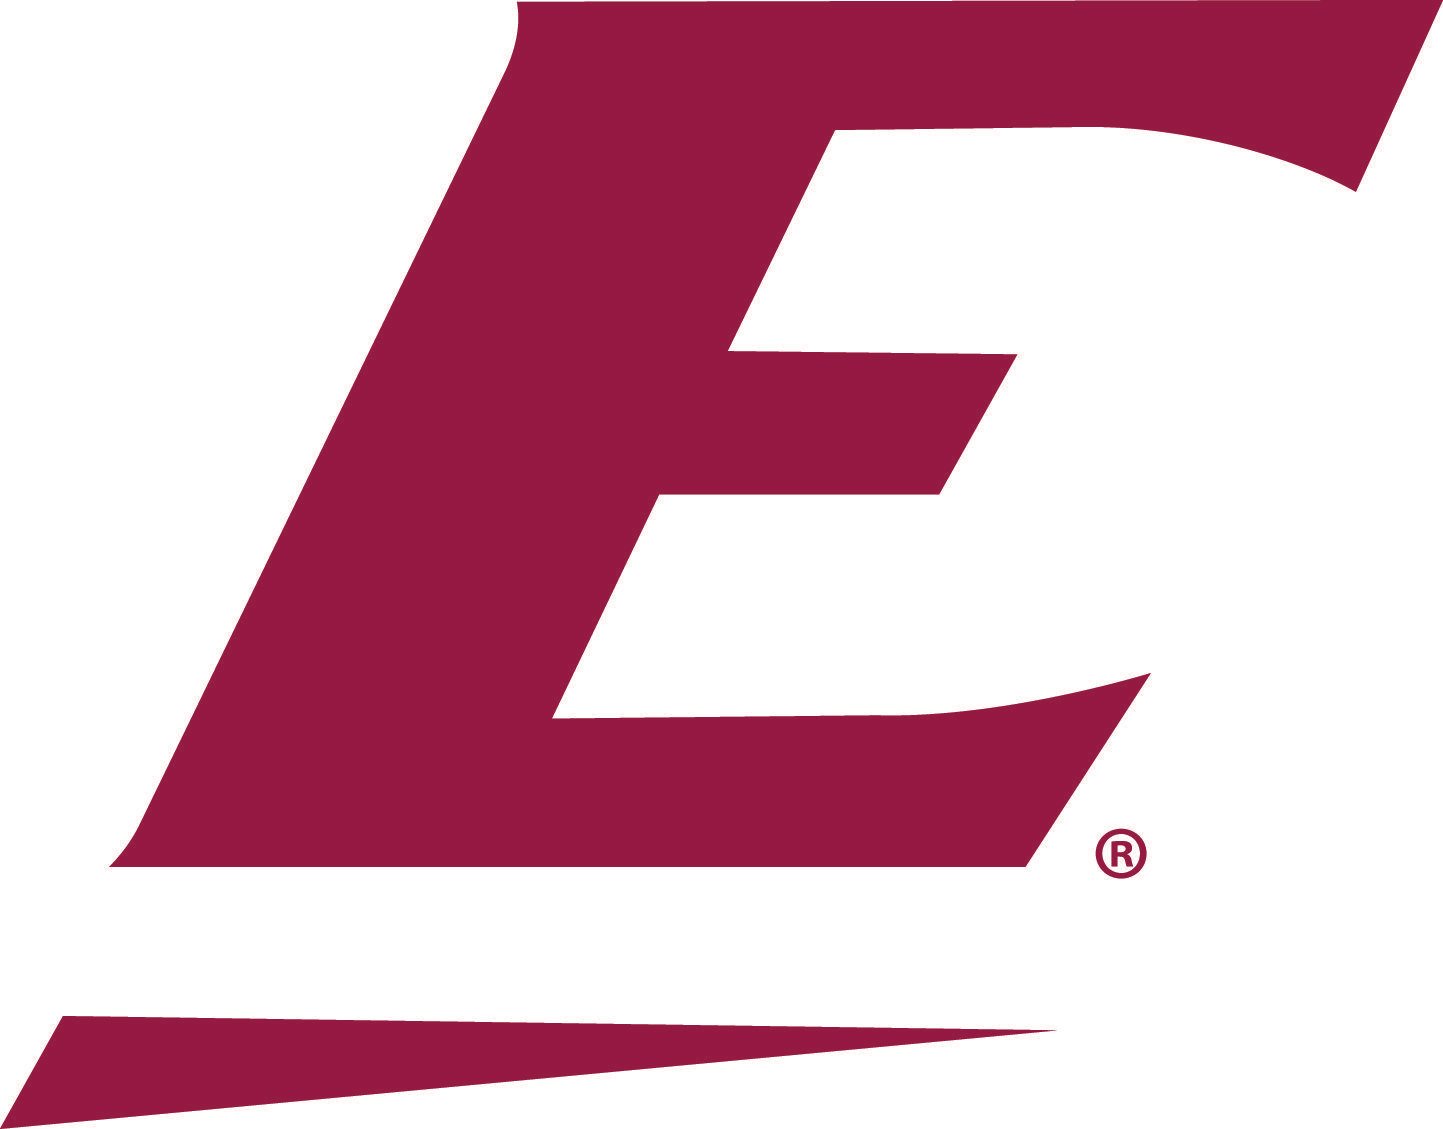 EKU Logo - EKU the second choice in OVC football poll in vote of league coaches